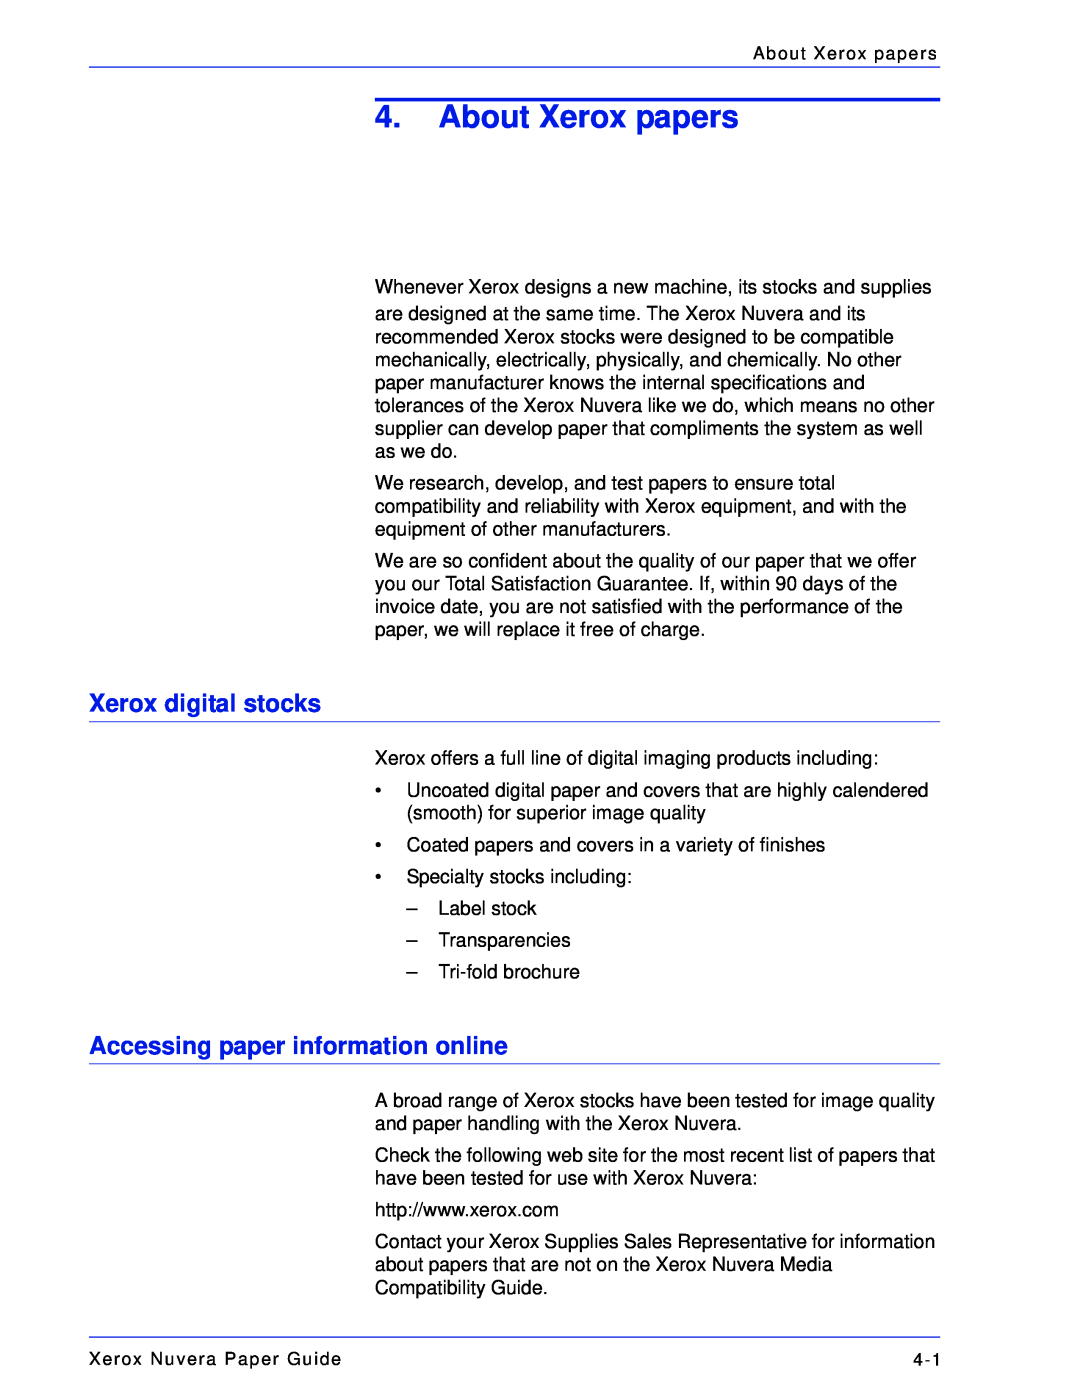 Xerox 701P28020 manual About Xerox papers, Xerox digital stocks, Accessing paper information online 